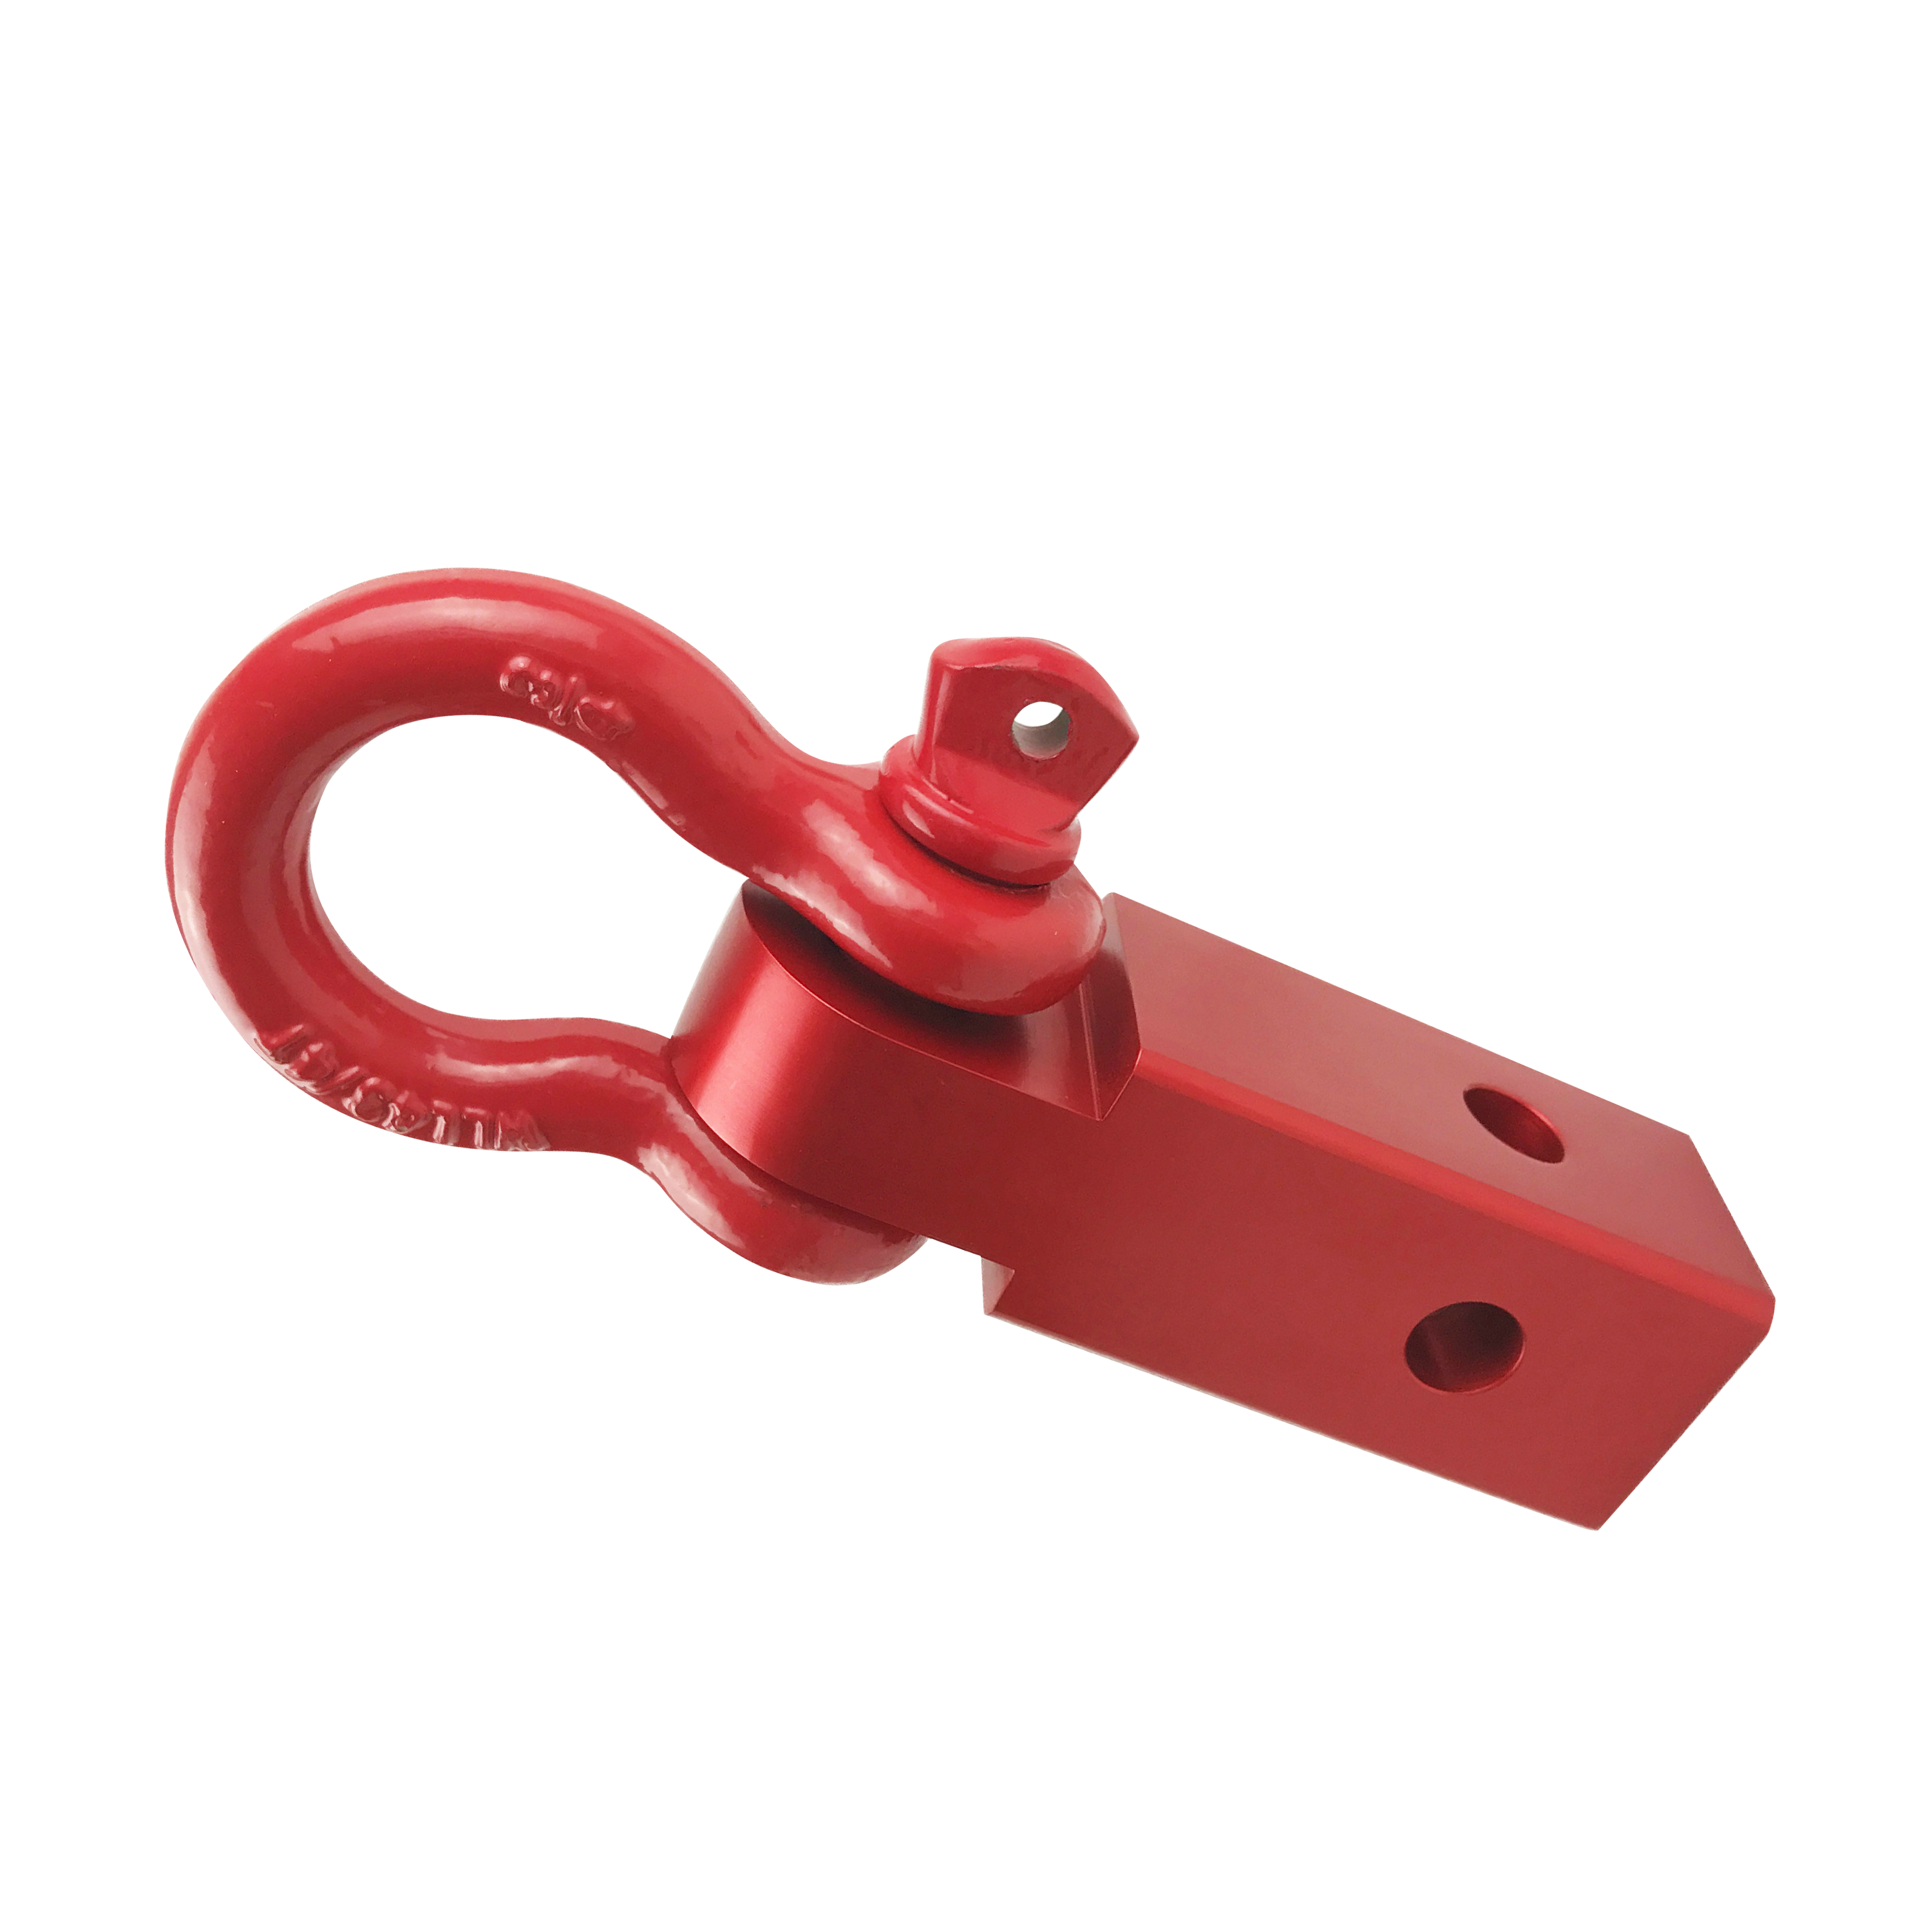 50mm Aluminum Steel Offroad Shackle Hitch Reciever